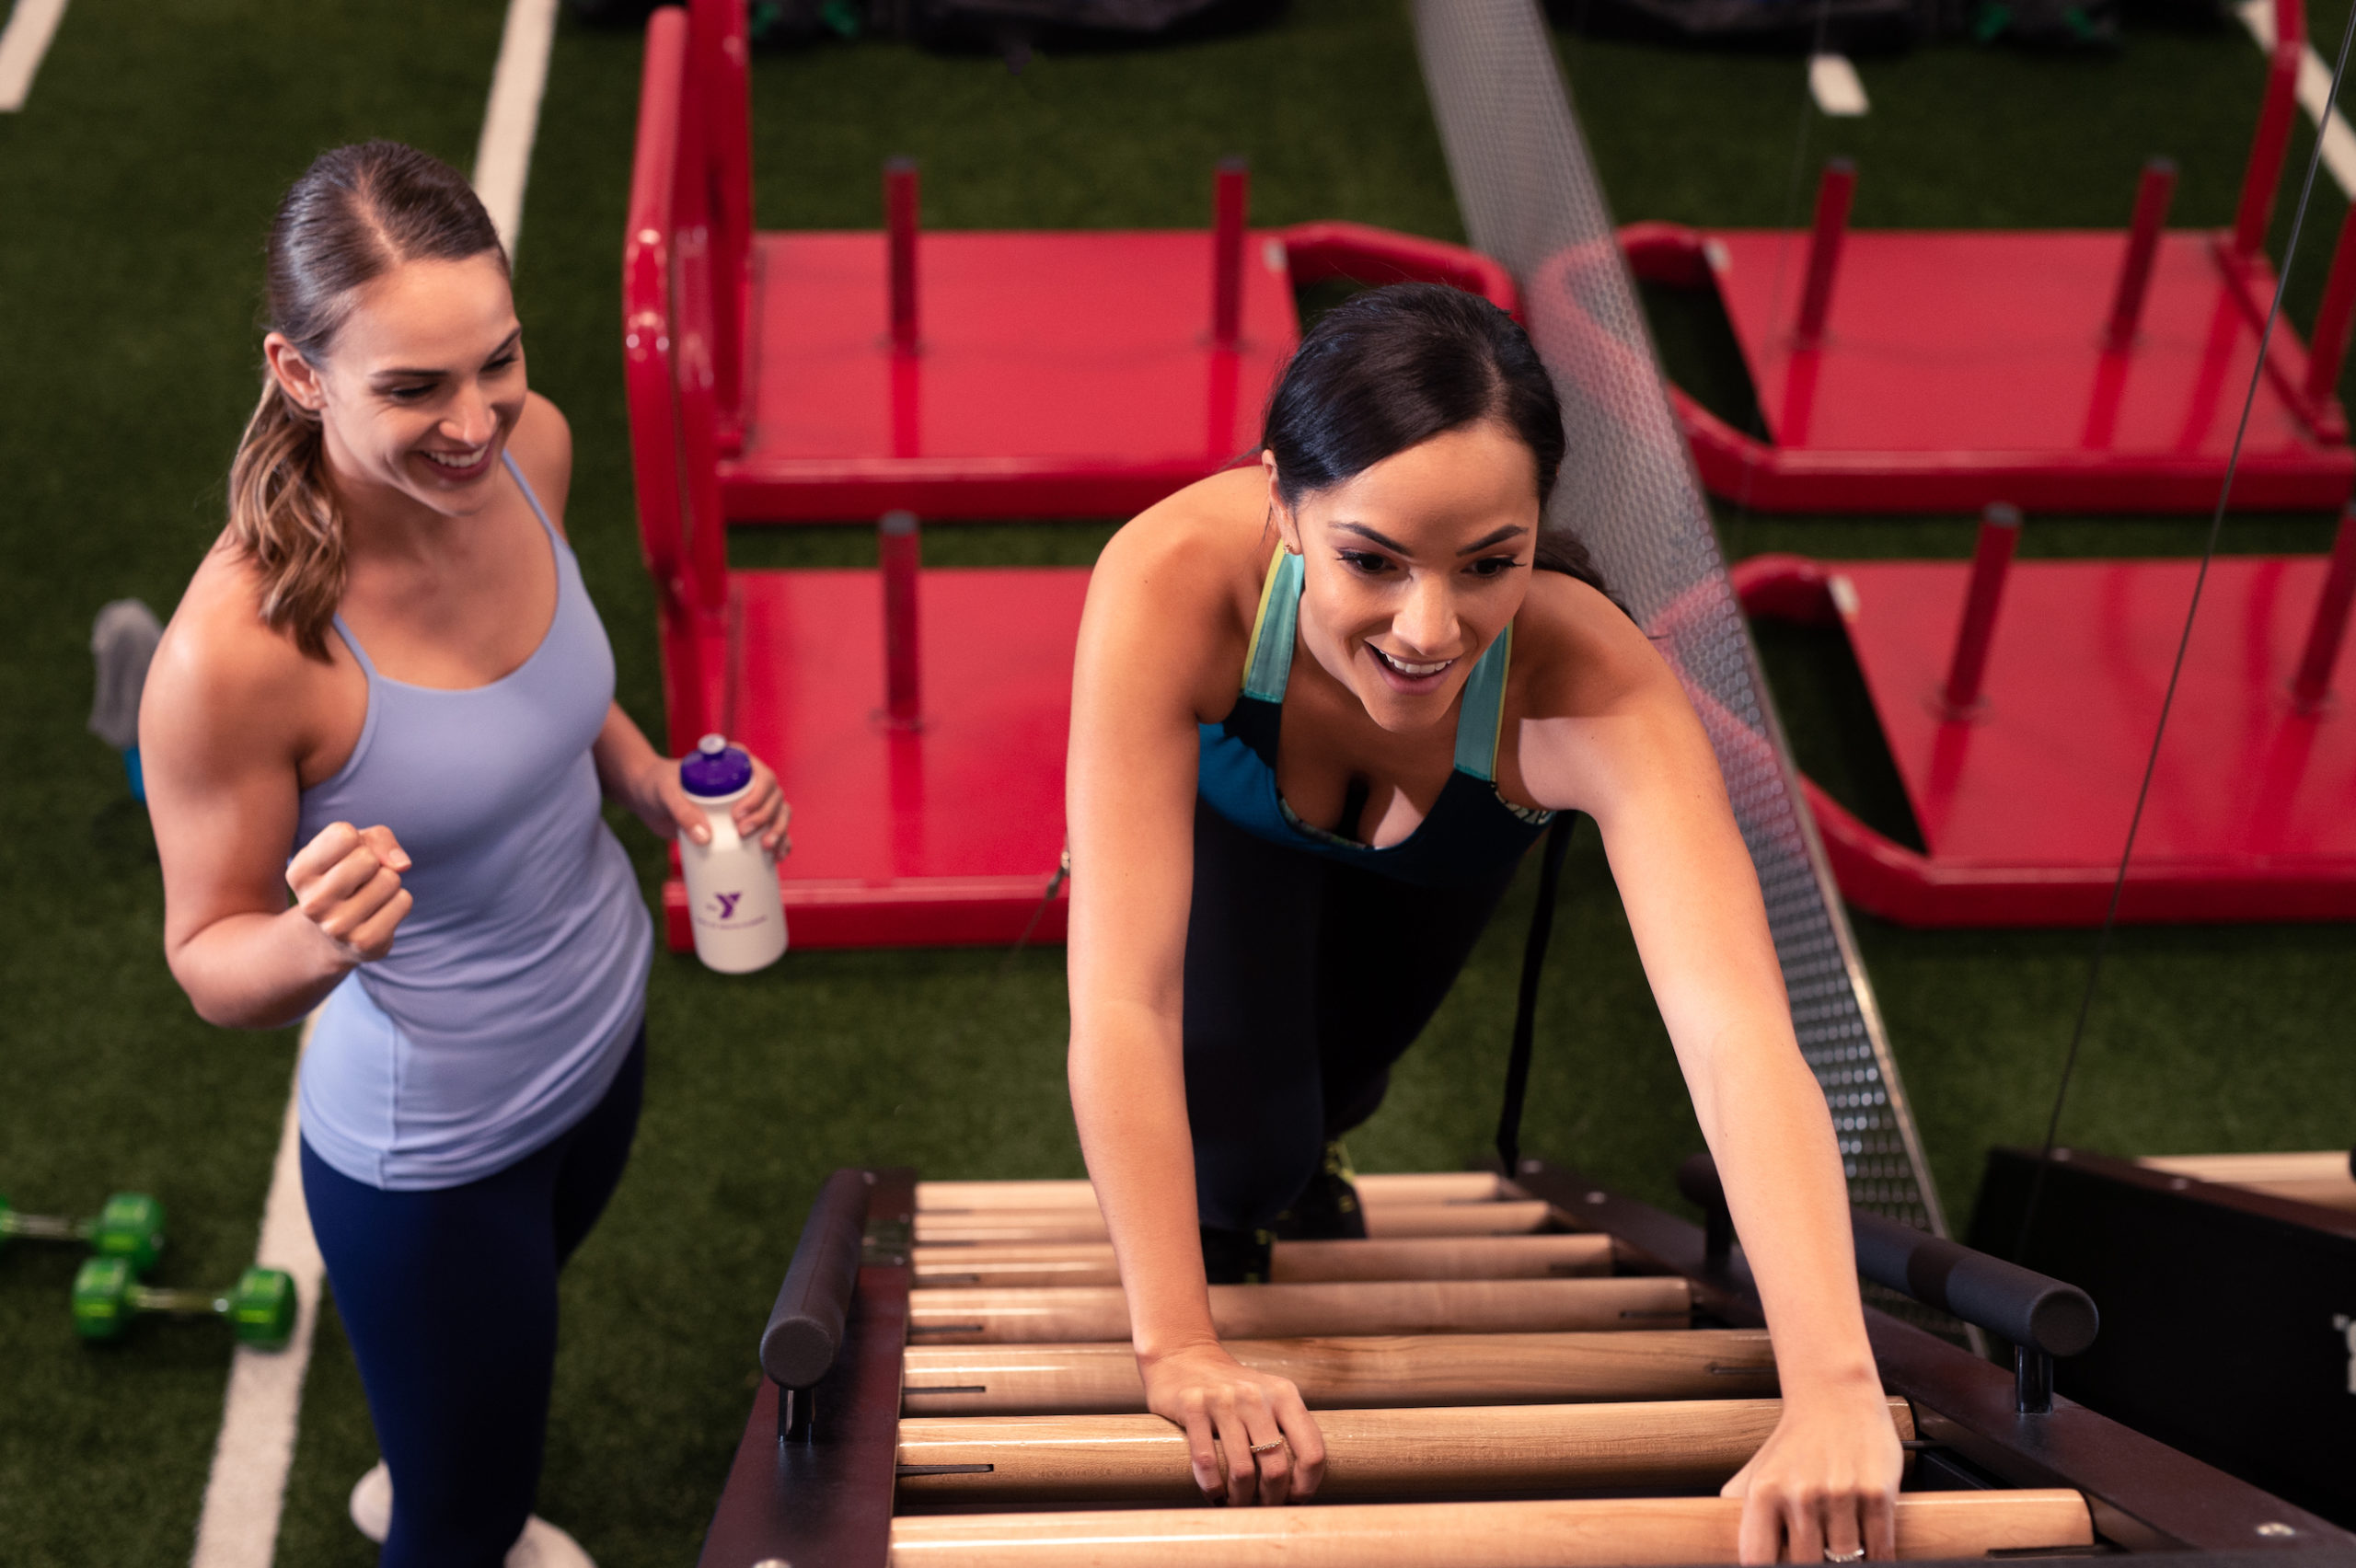 YMCA Overhead view of a woman climbing an exercise ladder with another woman cheering her on with both smiling